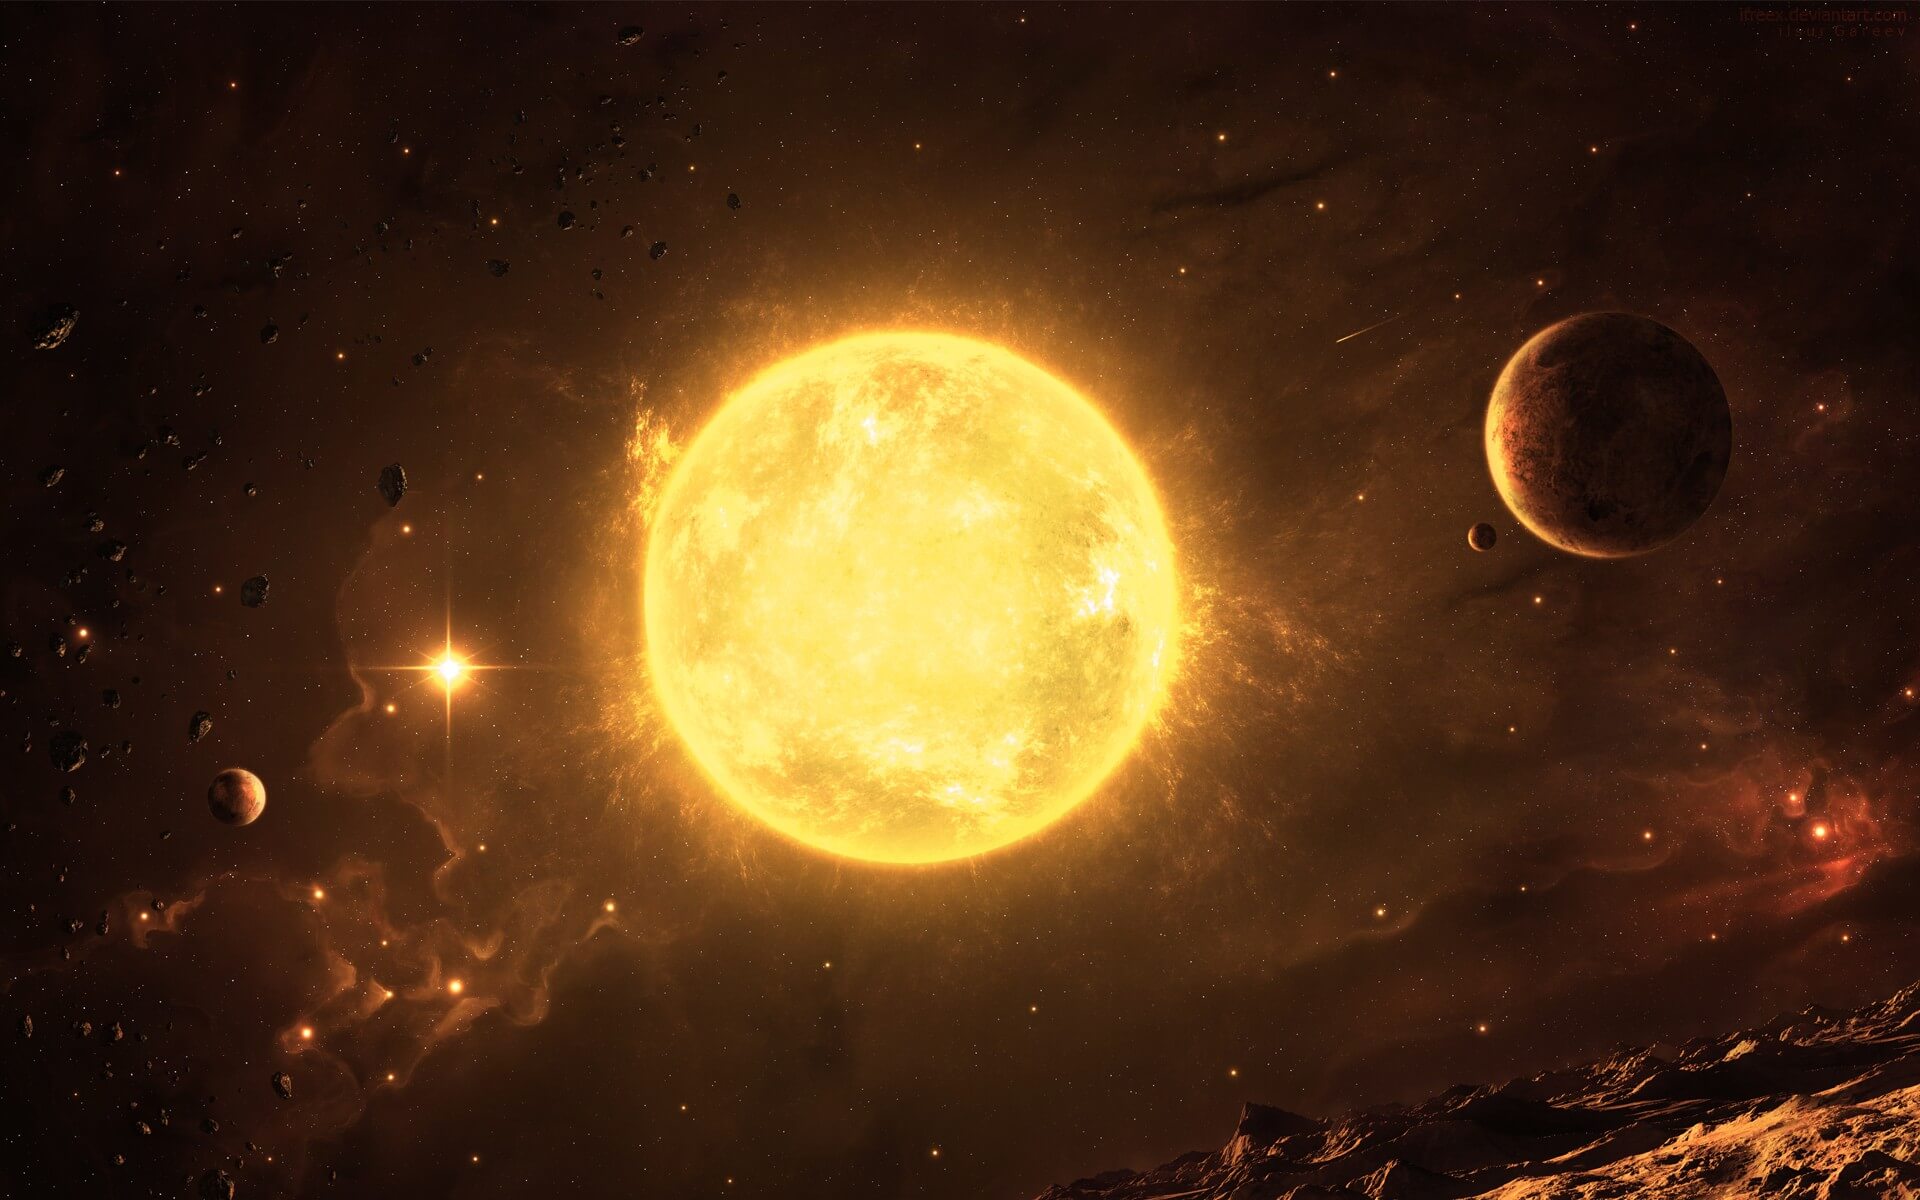 NASA has found new evidence that our Sun is no ordinary star